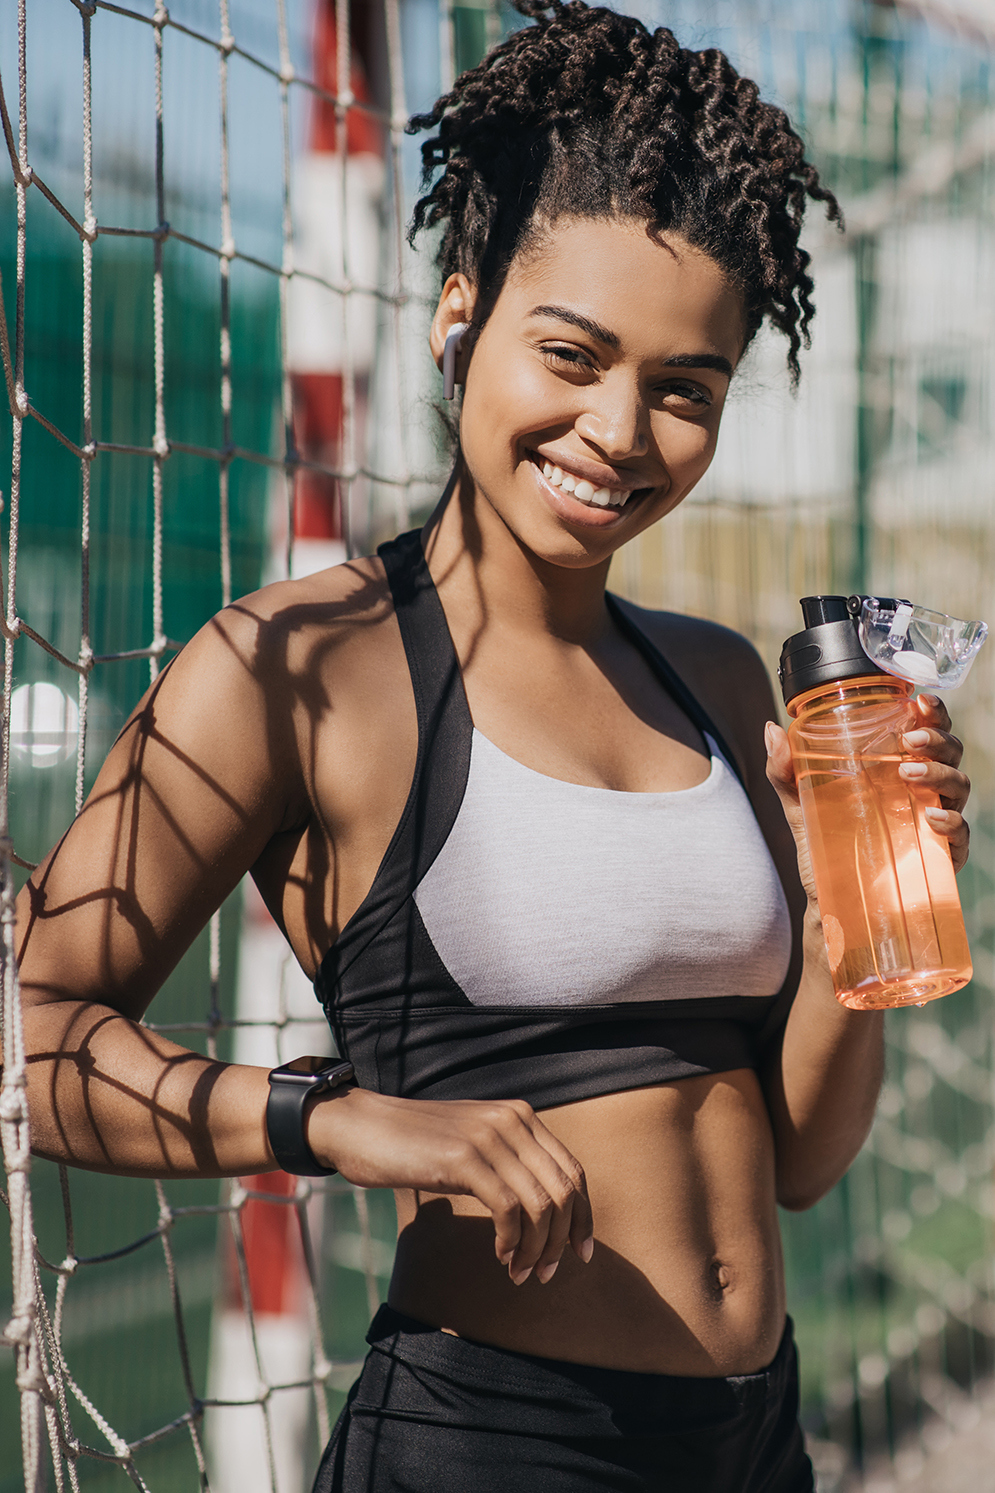 Fitness blogger and sports coach, workout outdoor in city. Smiling millennial african american lady in sportswear with headphones shows modern bottle of water with free space at stadium, vertical